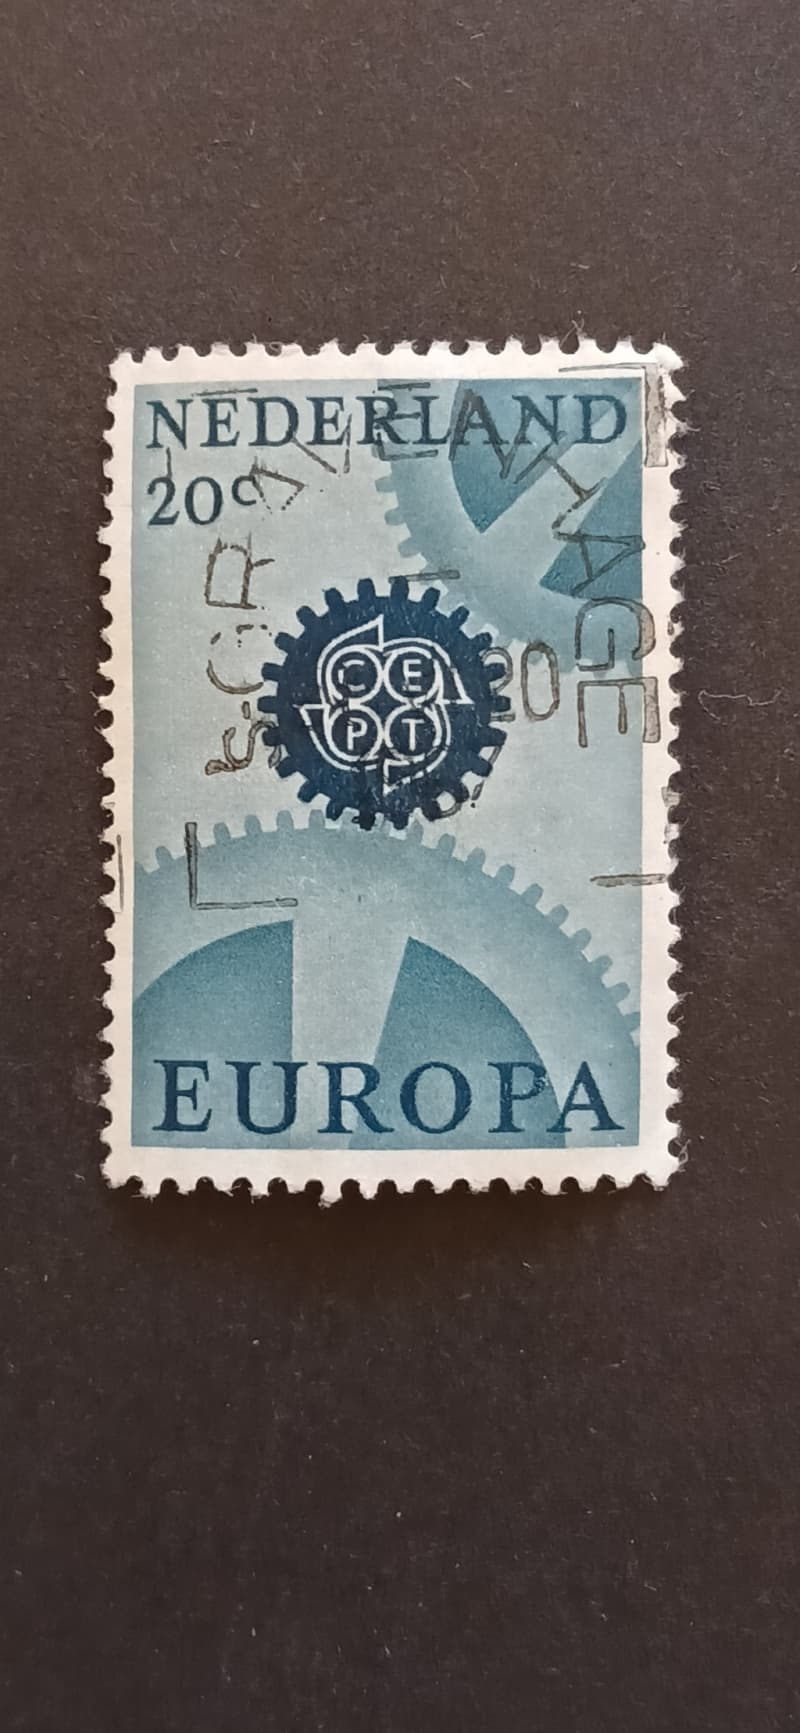 NETHERLANDS 1967 EUROPA STAMPS